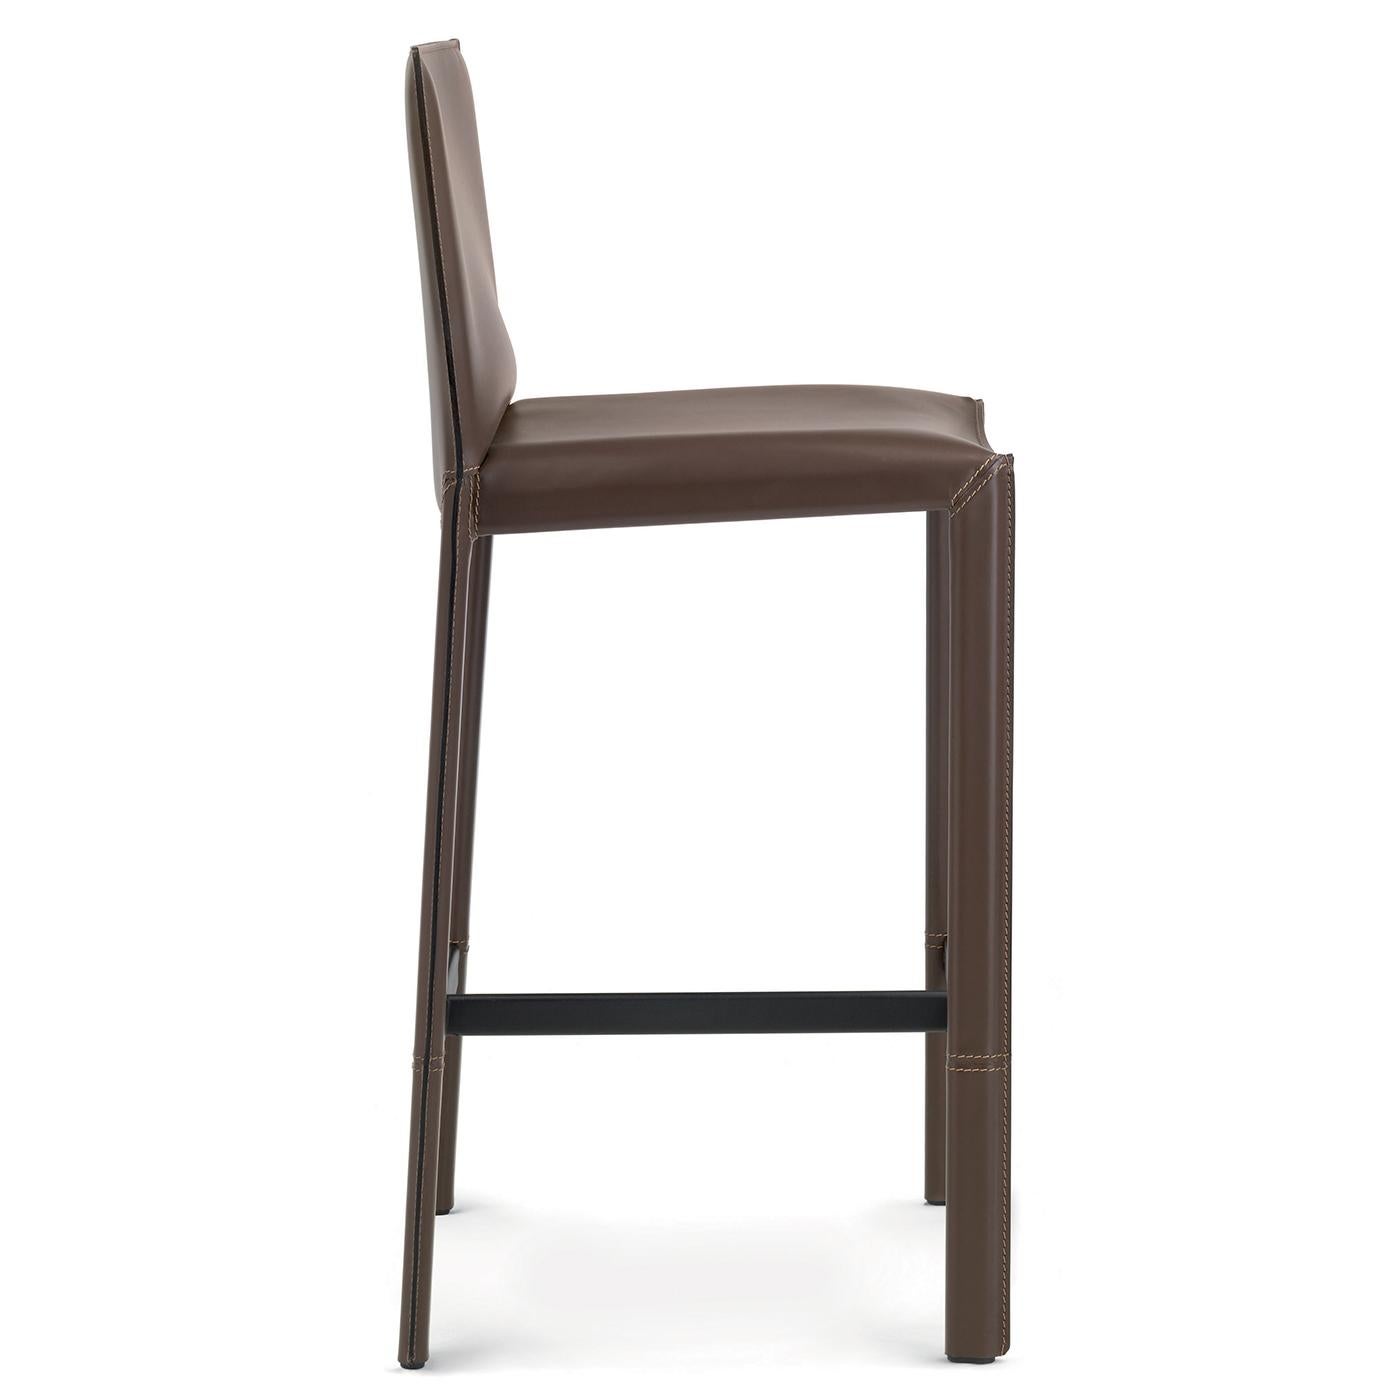 This sturdy counter stool features a tubular steel frame completely covered in terra-colored leather and a black, embossed footrest. Black technical fabric covers the metal seat pan. Its barely-there profile is made up of sleek geometric lines at